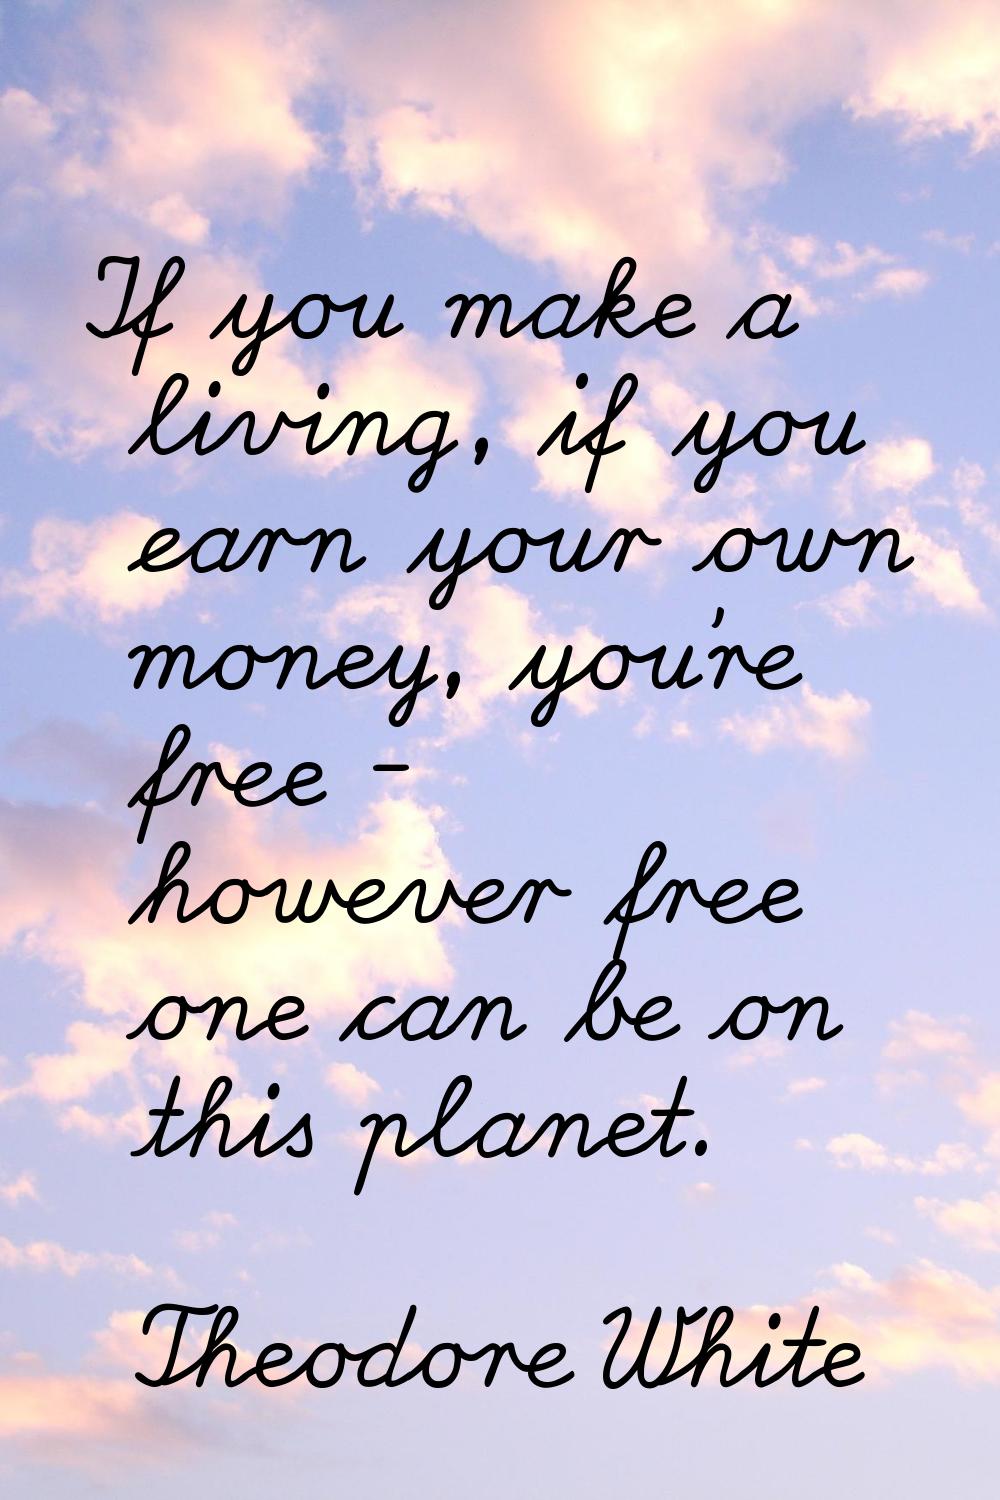 If you make a living, if you earn your own money, you're free - however free one can be on this pla